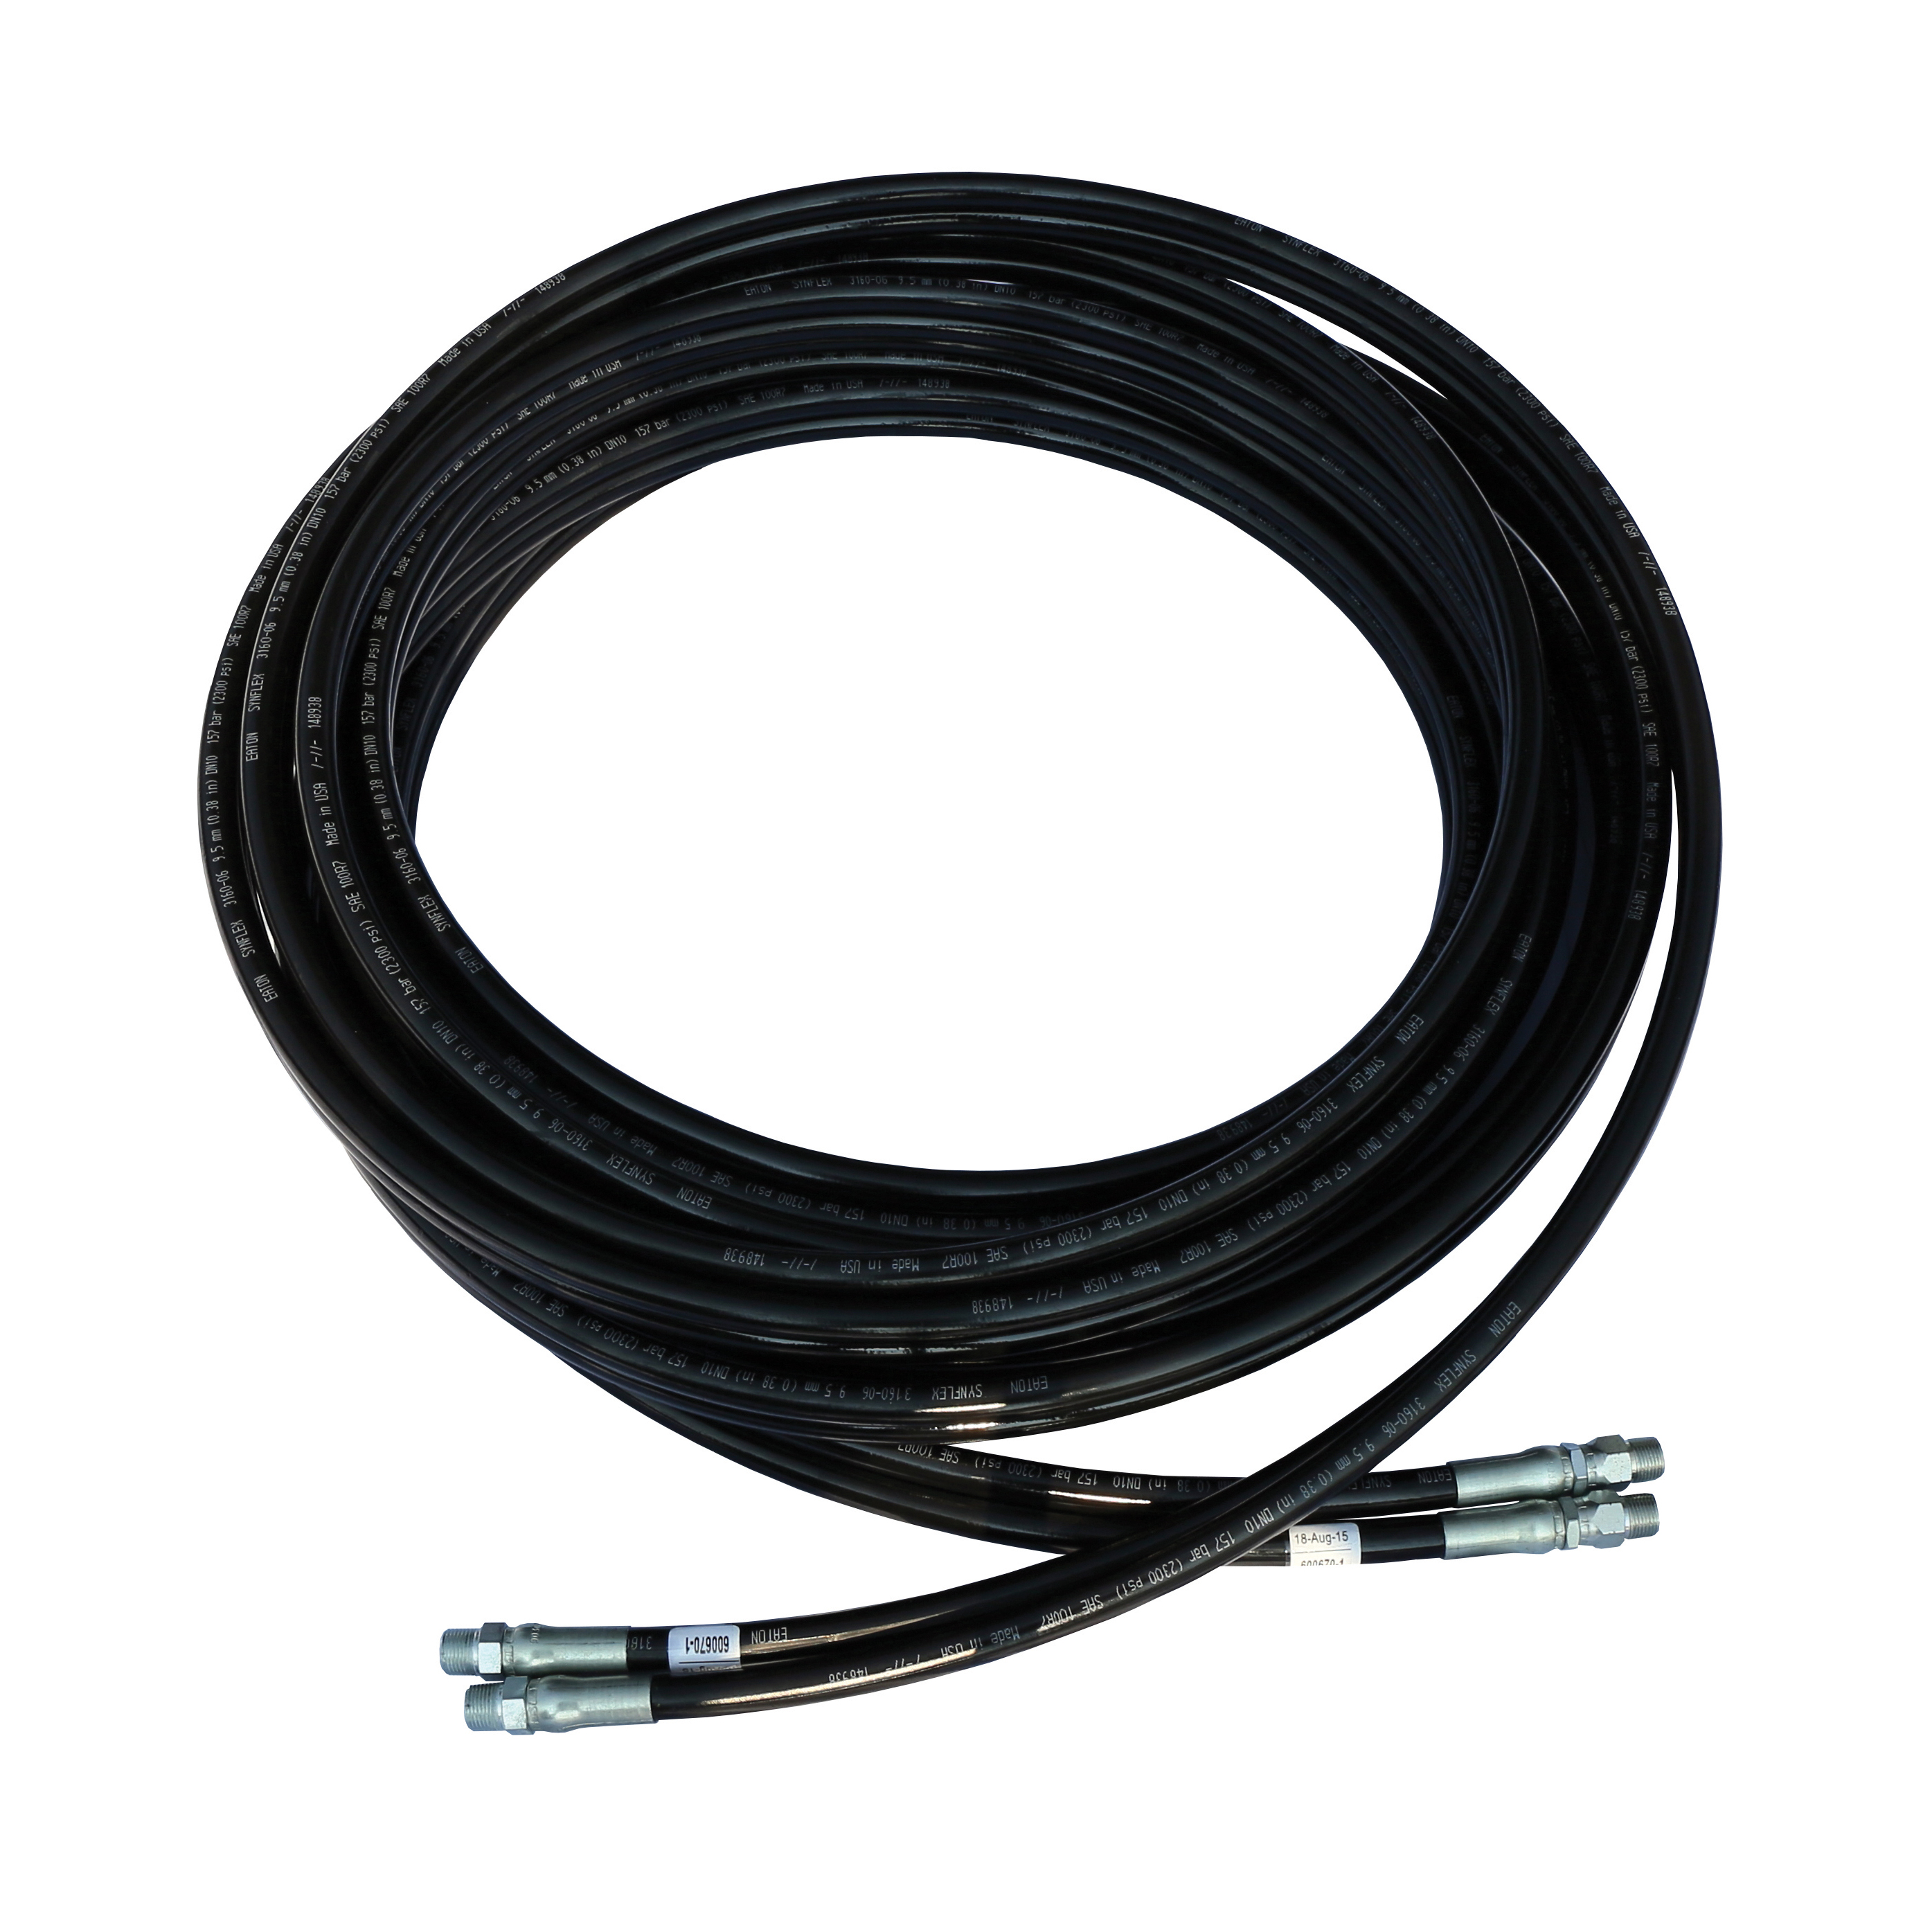 Reelcraft 600670-1 - 3/8 in. x 50 ft. Twin Hydraulic Hose